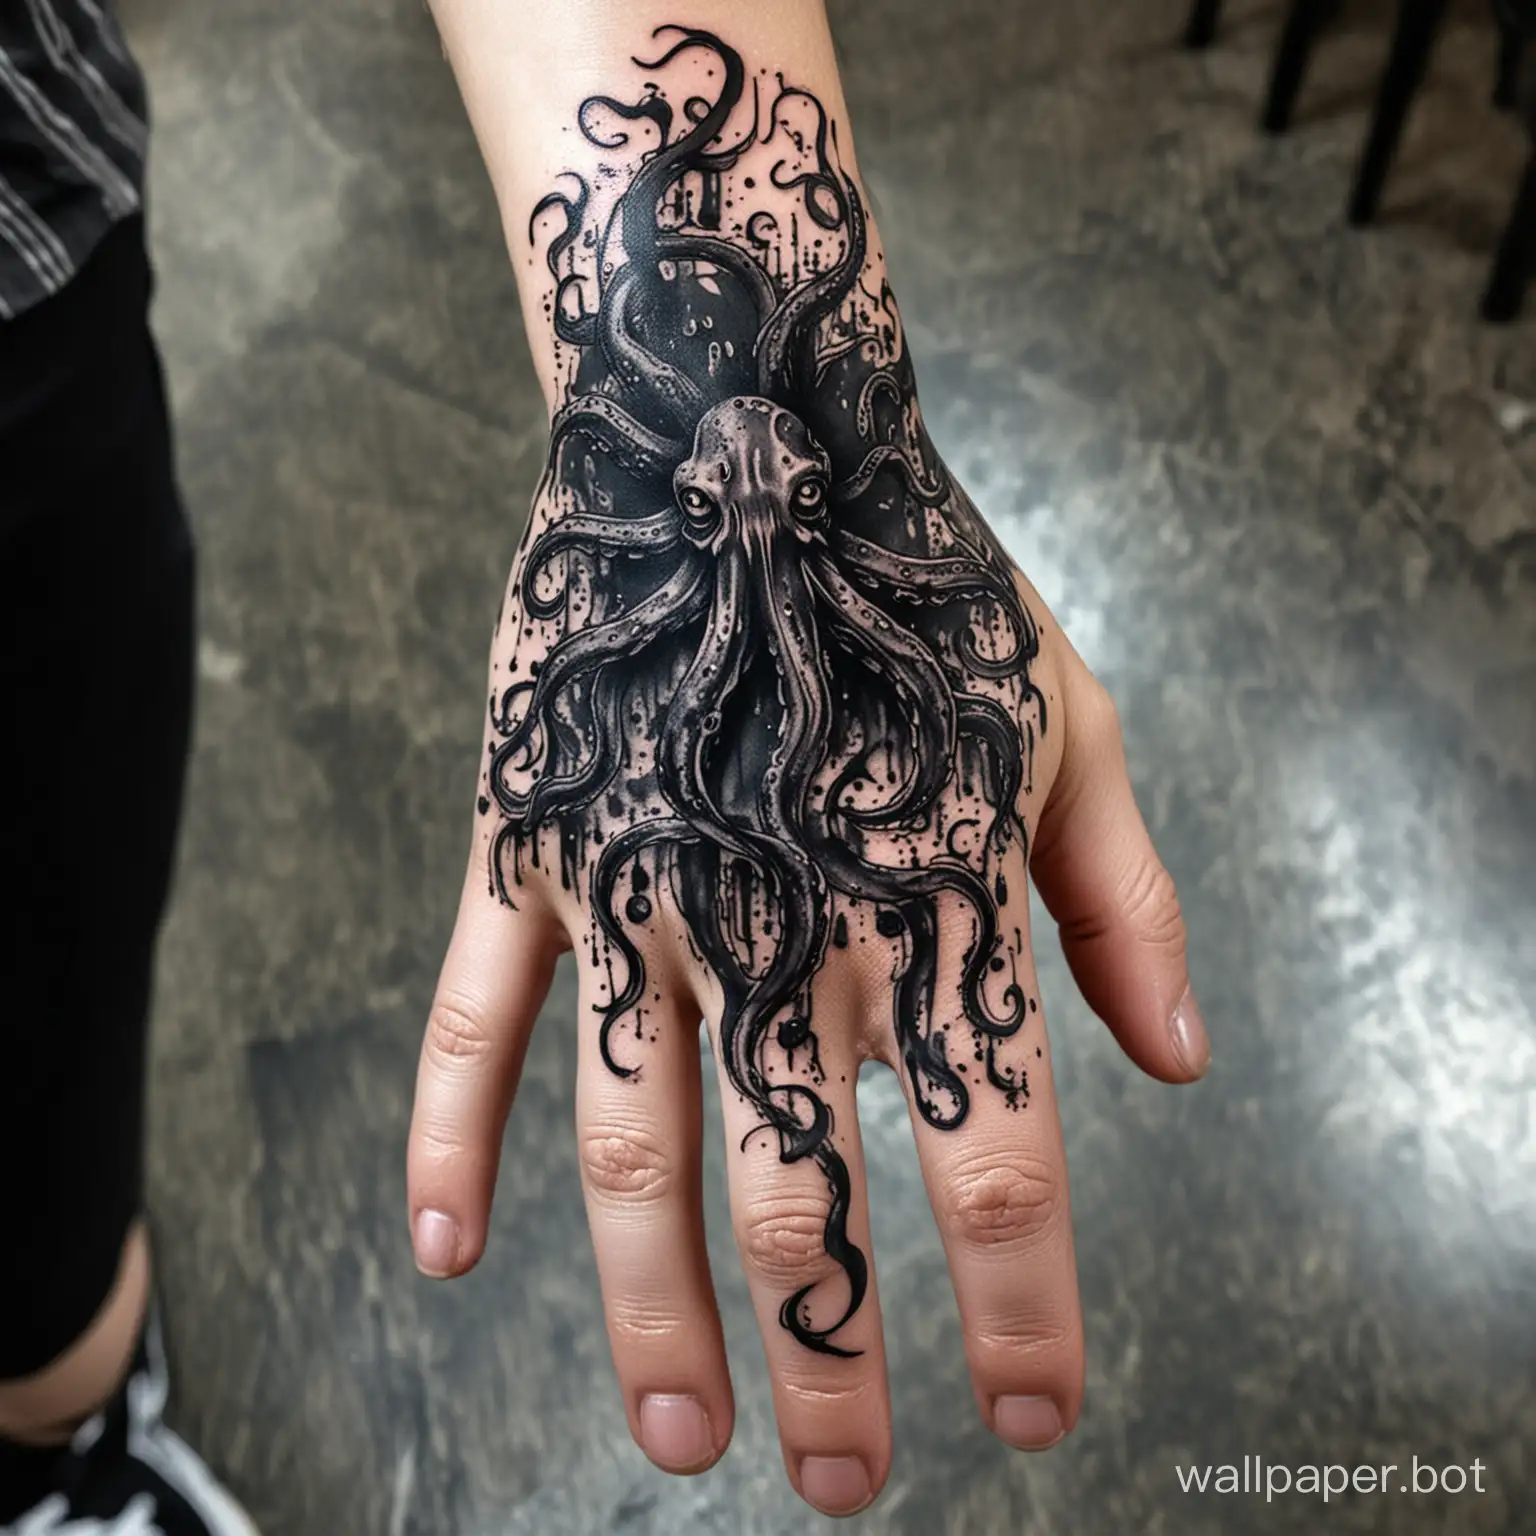 Eerie-Hand-Tattoo-Dark-Black-Cloud-with-Dripping-Tentacles